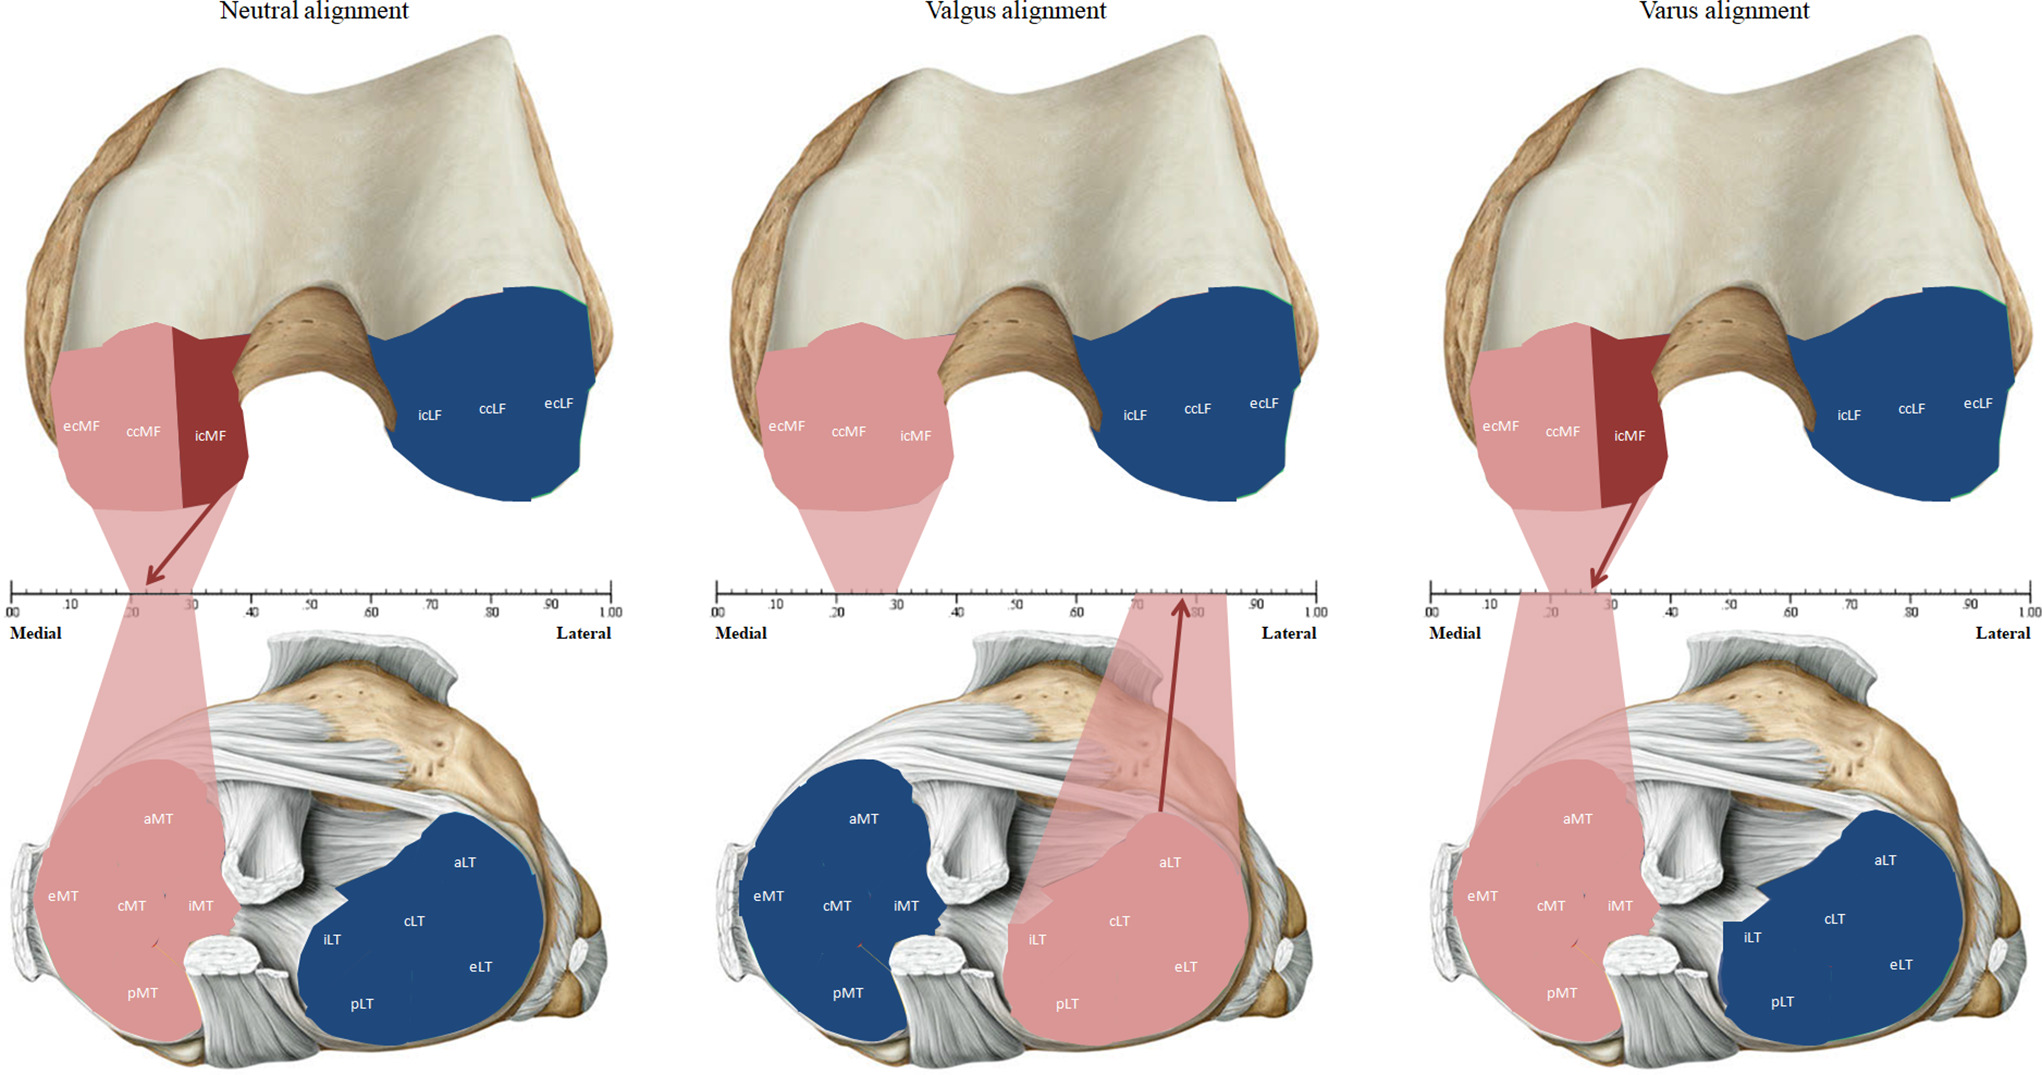 Fig. 5 
          Data derived from Table I show the analyzed subregions at the tibia (lower section) and the femur (upper section) with highlights of specific areas of high correlation between cartilage volume loss and its corresponding (x)-specific location. Colour-coded correlations: Blue area, subregion with low statistical correlation (r < 0.7); pink area, subregion with high statistical correlation (r ≥ 0.7); red area, subregion with highest statistical correlation in its alignment group; arrow, (x)-location with highest statistical correlation in its alignment group. aLT, anterior lateral tibia; aMT, anterior medial tibia; ccLF, central lateral femur; ccMF, central medial femur; cLT, central lateral tibia; cMT, central medial tibia; ecLF, external central lateral femur; ecMF, external central medial femur; eLT, external lateral tibia; eMT, external medial tibia; icLF, internal central lateral femur; icMF, internal central medial femur; iLT, internal lateral tibia; iMT, internal medial tibia; pLT, posterior lateral tibia; pMT, posterior medial tibia.
        